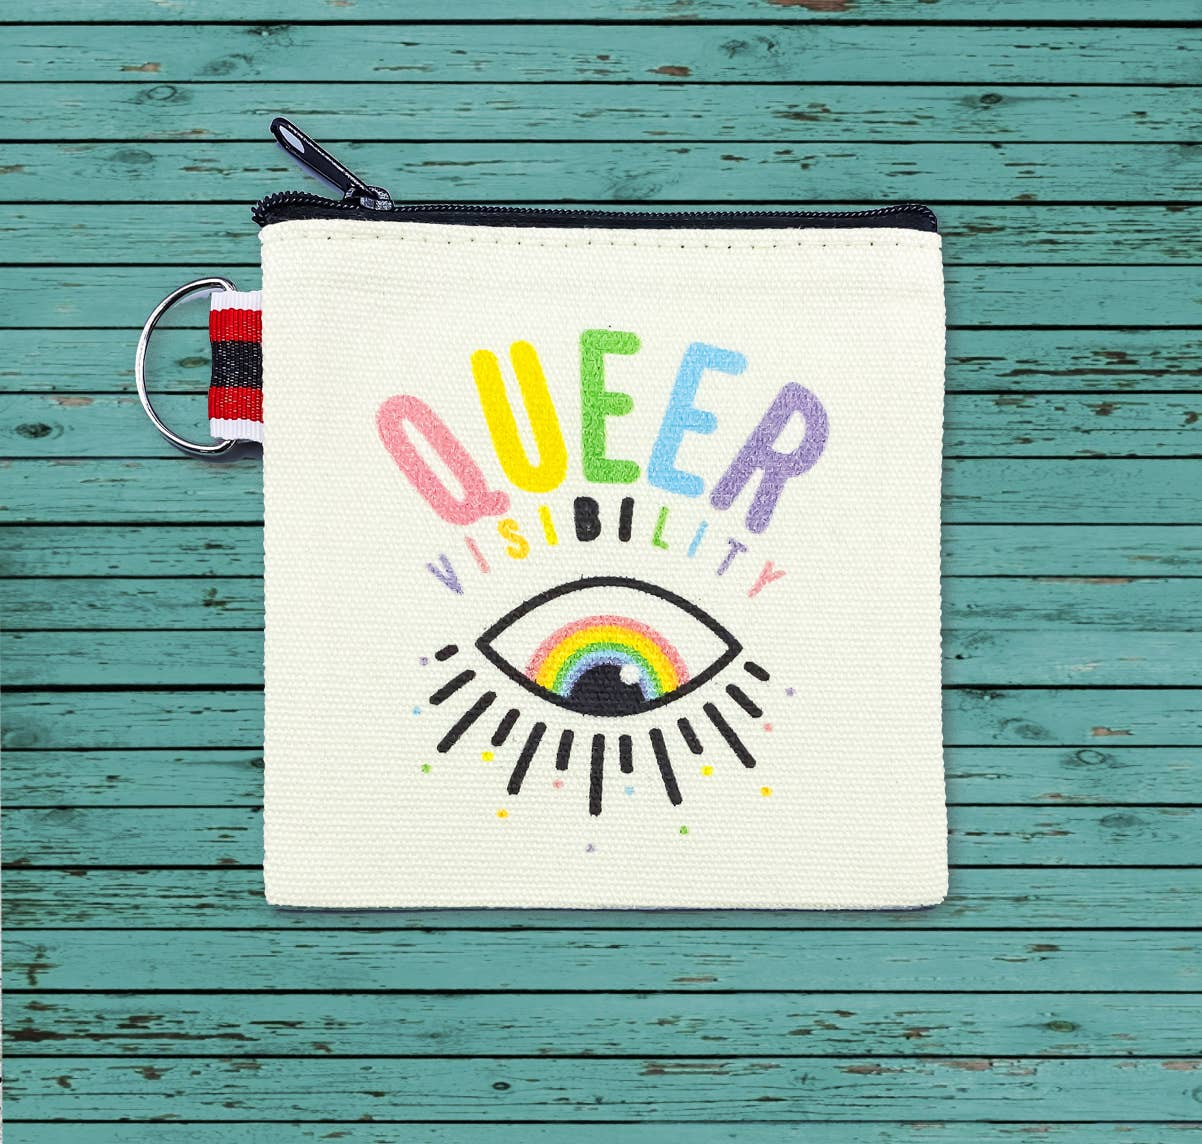 Citizen Ruth - Queer Visibility Pouch  Citizen Ruth   